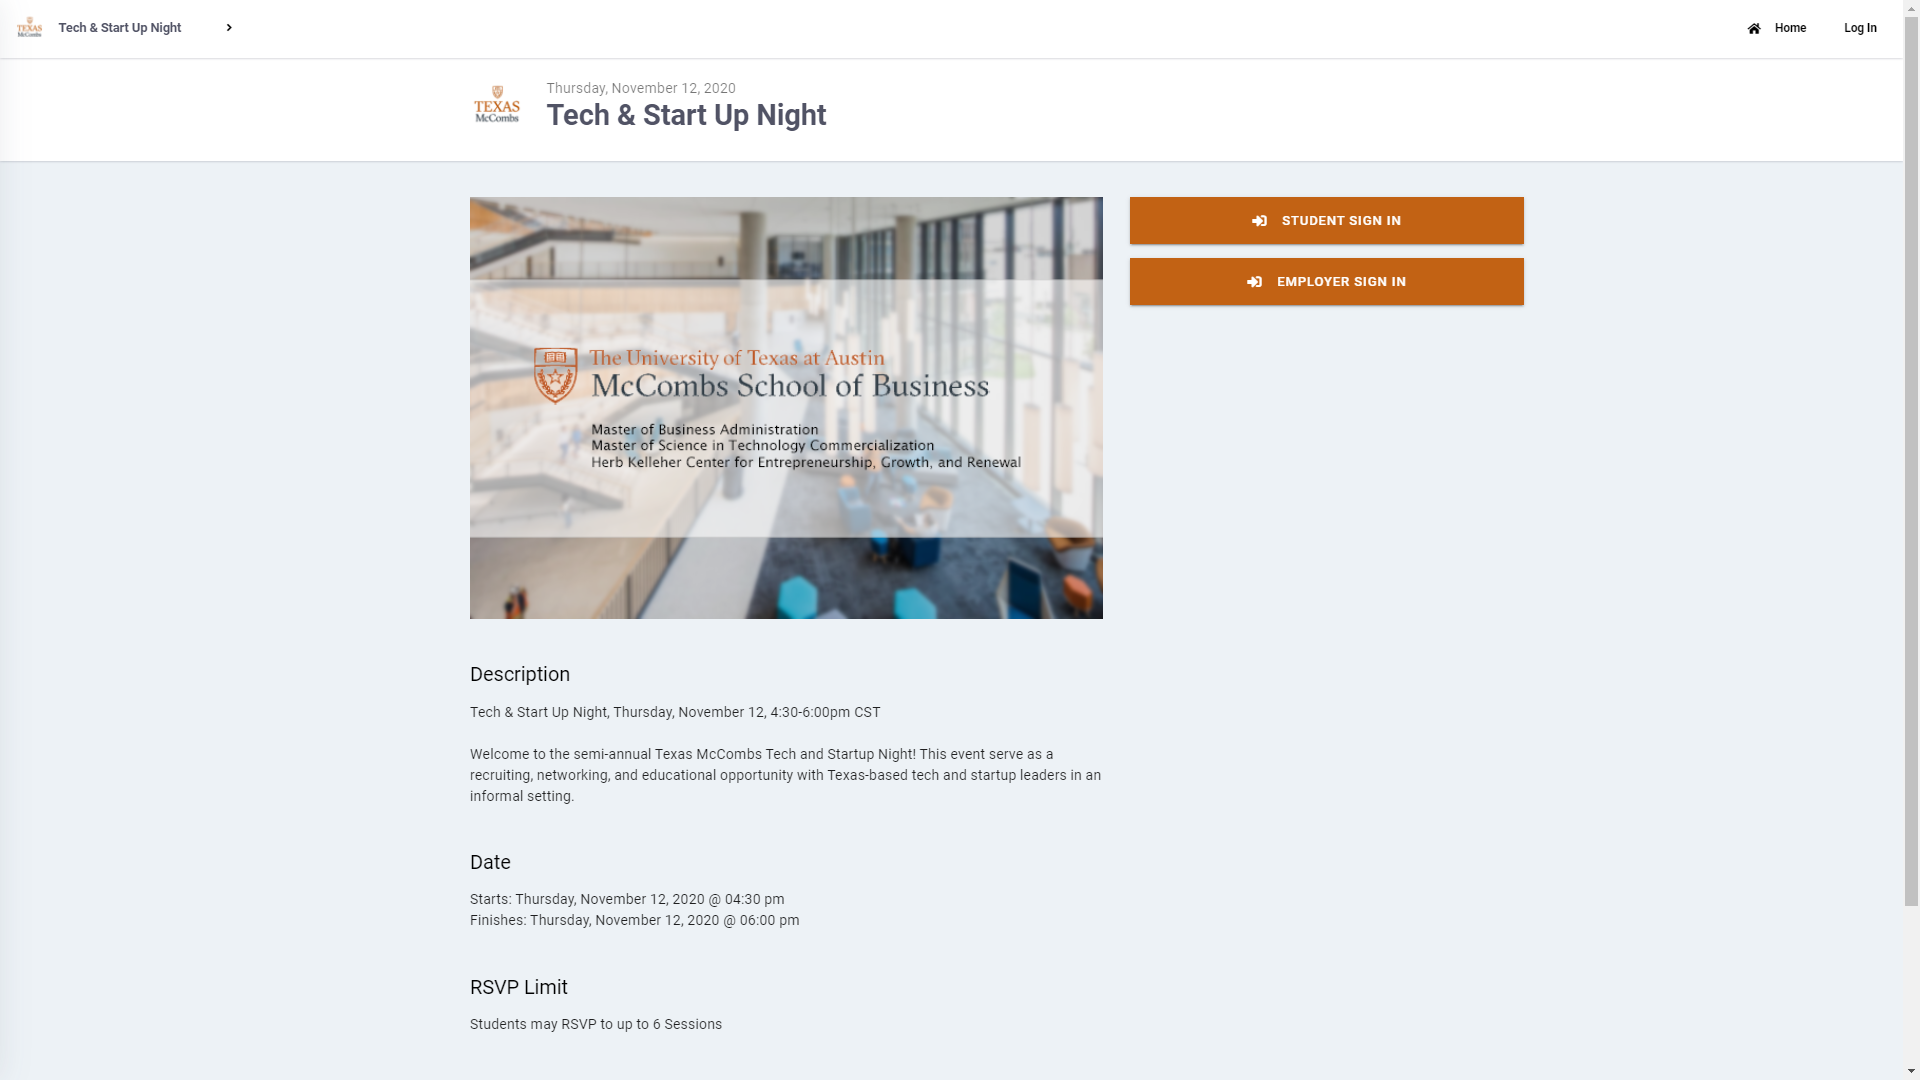 McCombs Tech and Startup Night Event Description